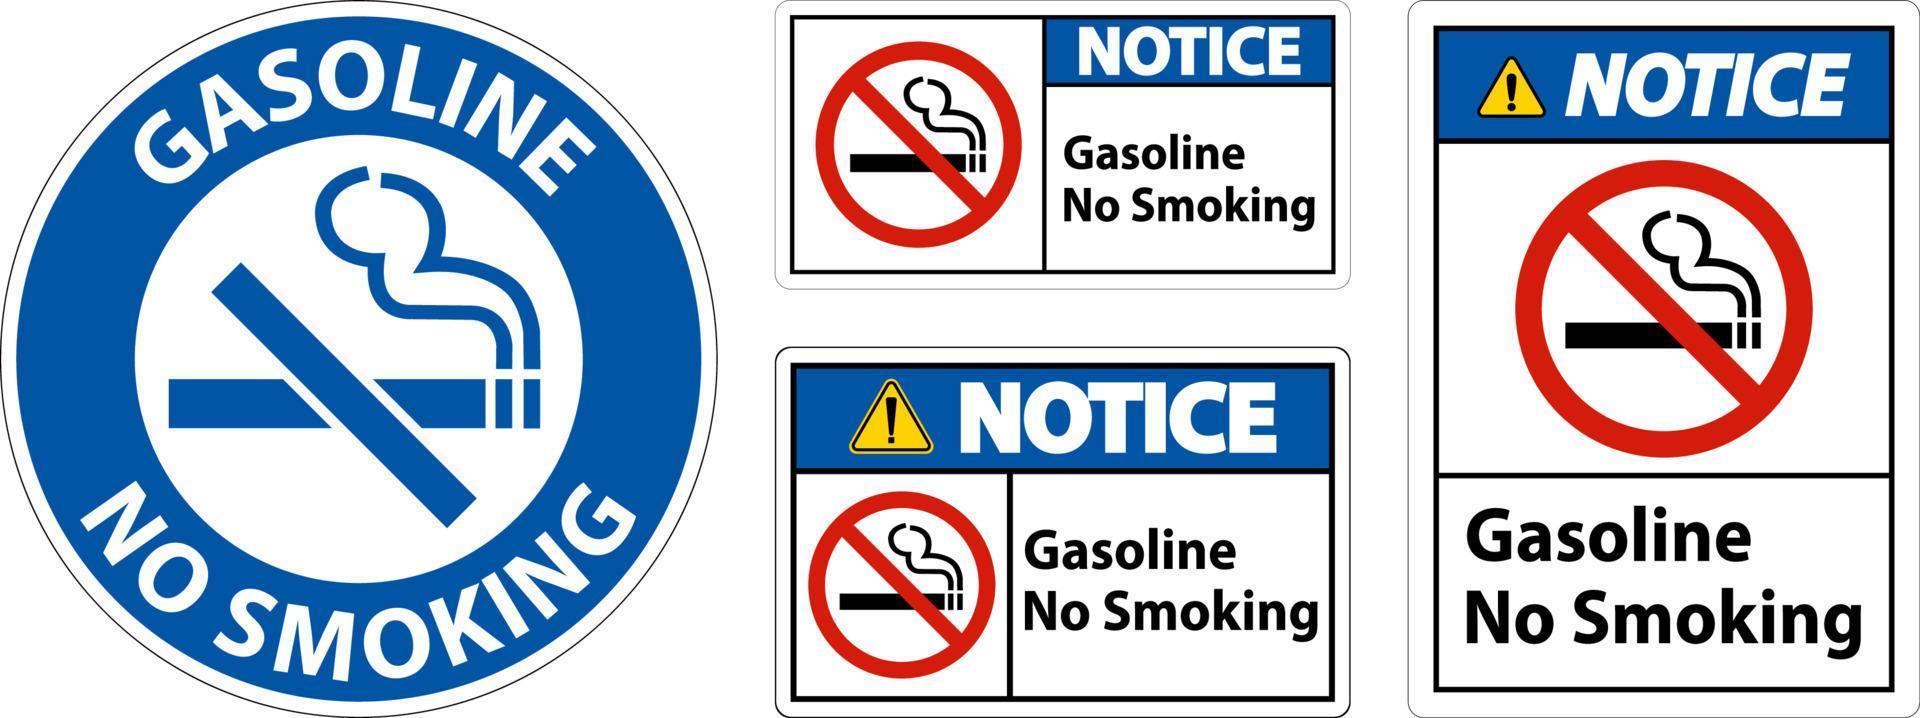 Notice Gasoline No Smoking Sign On White Background vector